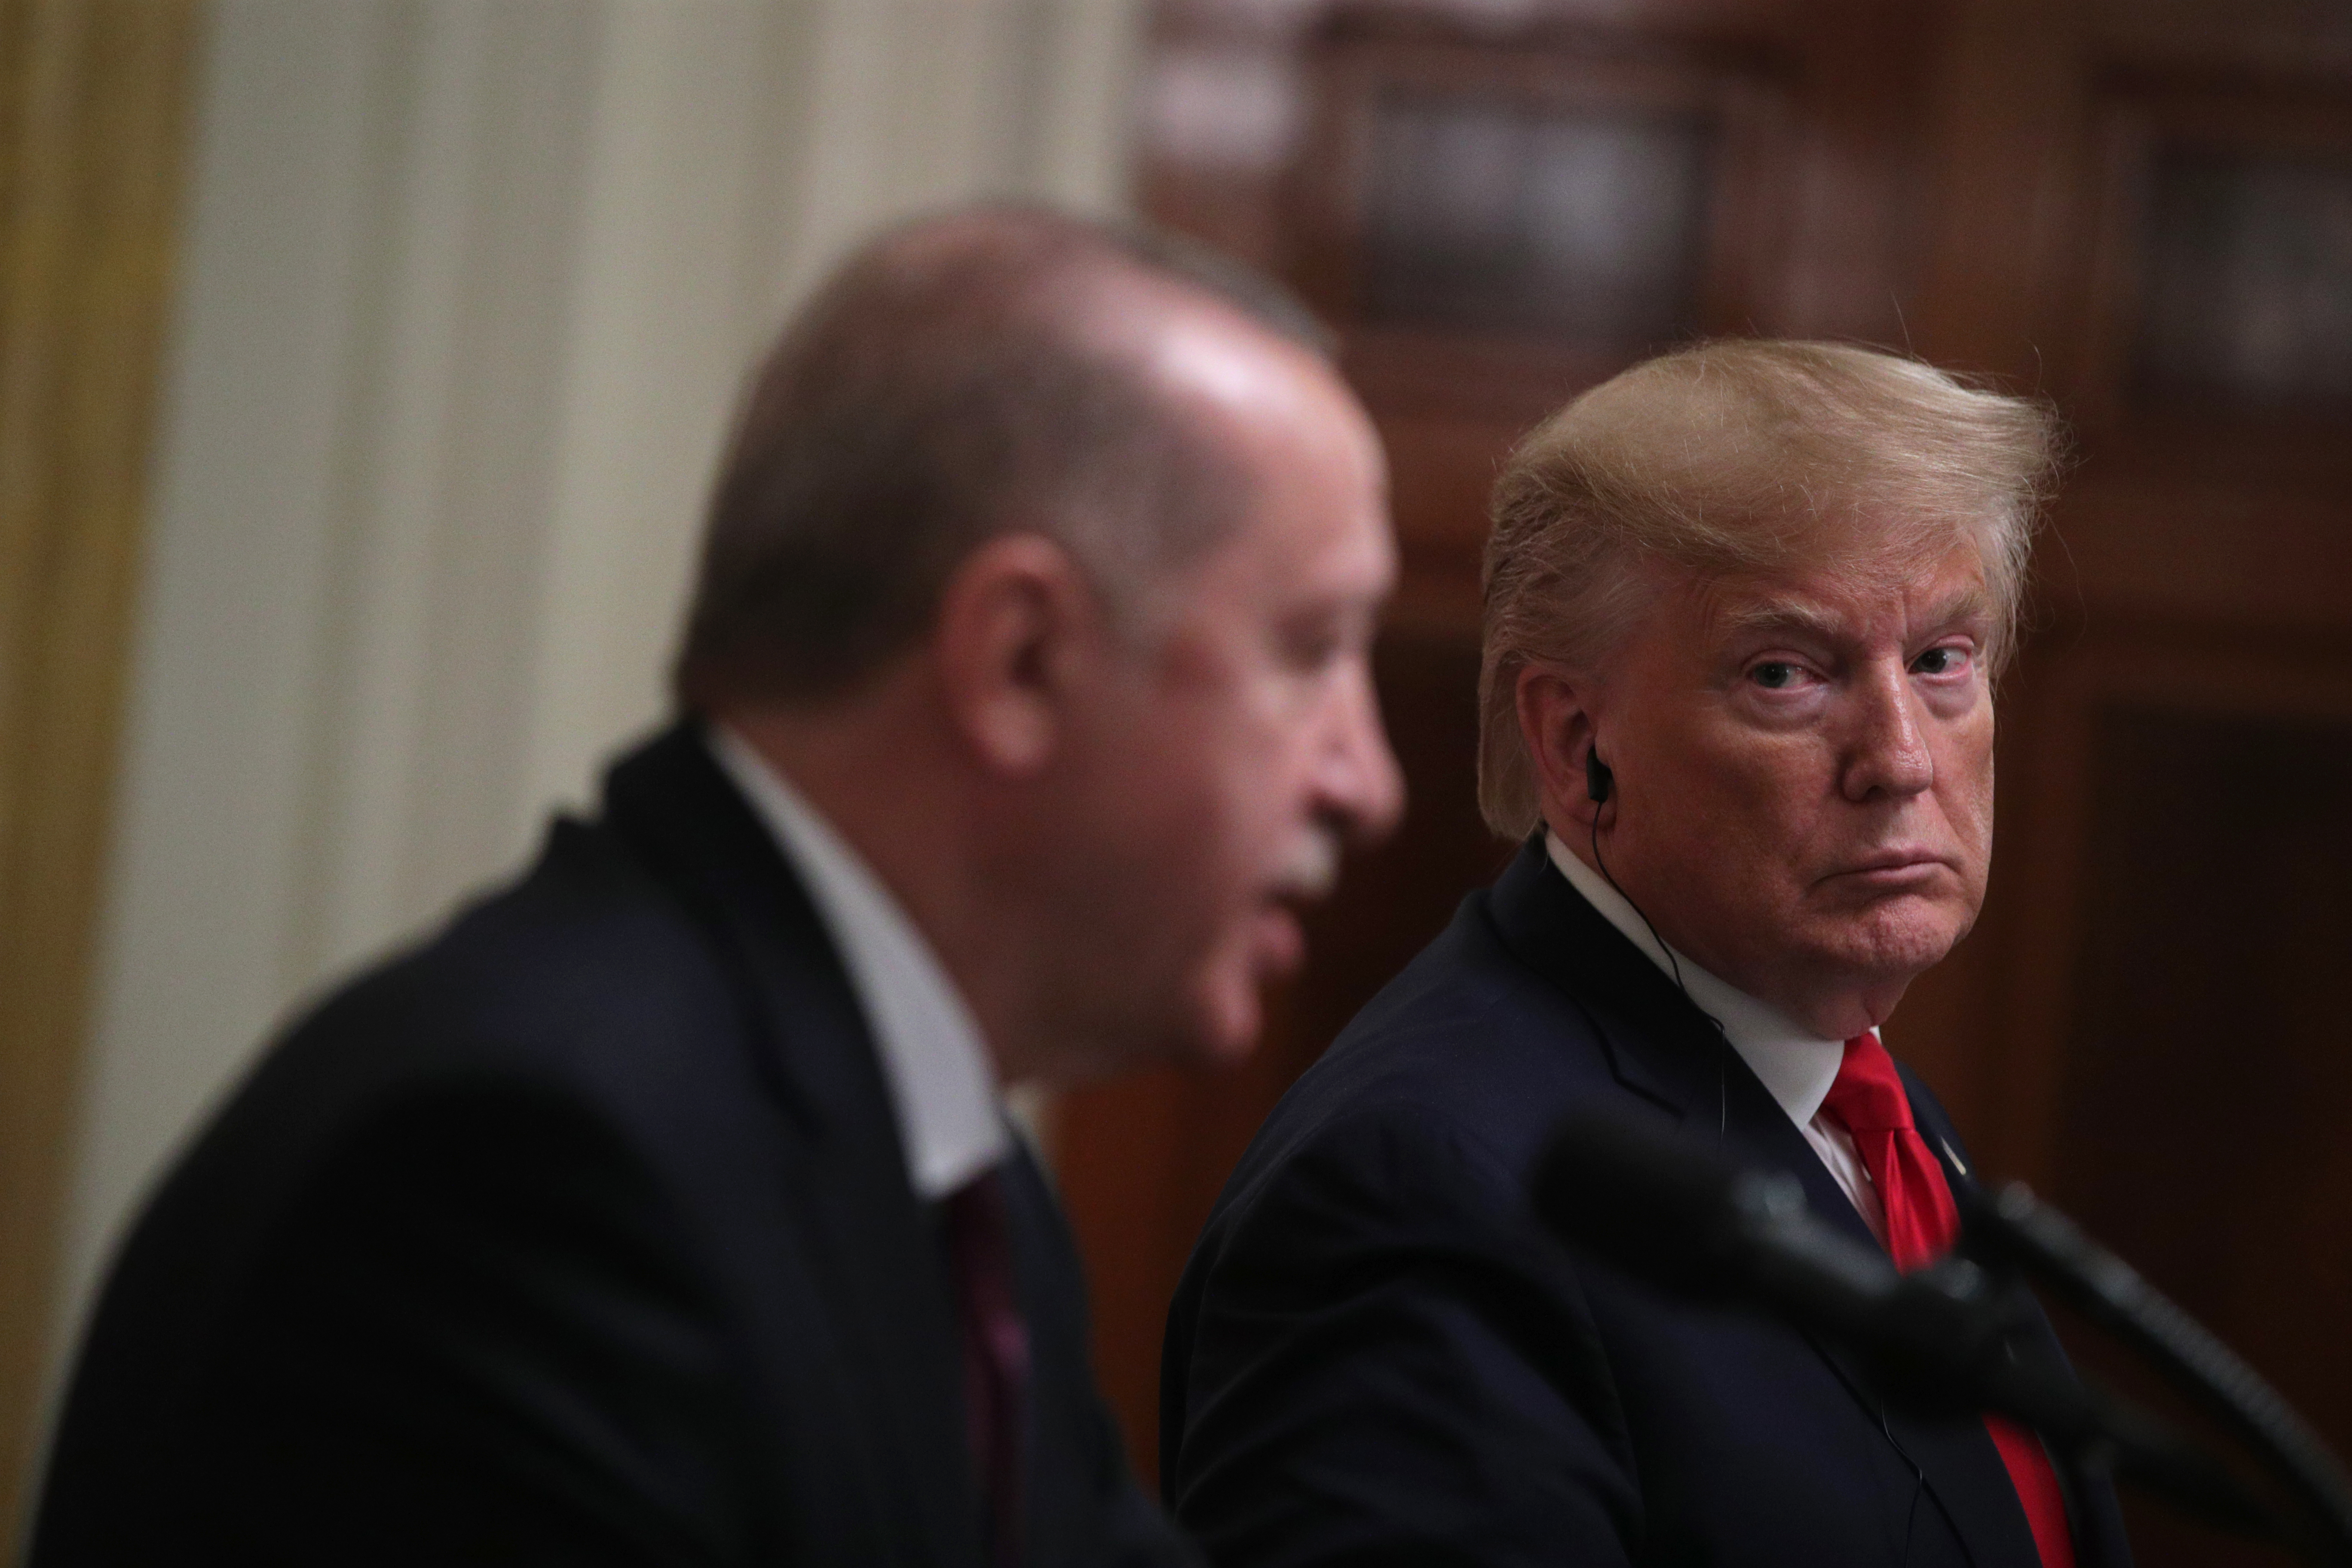 U.S. President Donald Trump listens as Turkish President Recep Tayyip Erdogan answers a question during a press conference in the East Room of the White House on November 13, 2019 in Washington, DC. (Photo by Alex Wong/Getty Images)